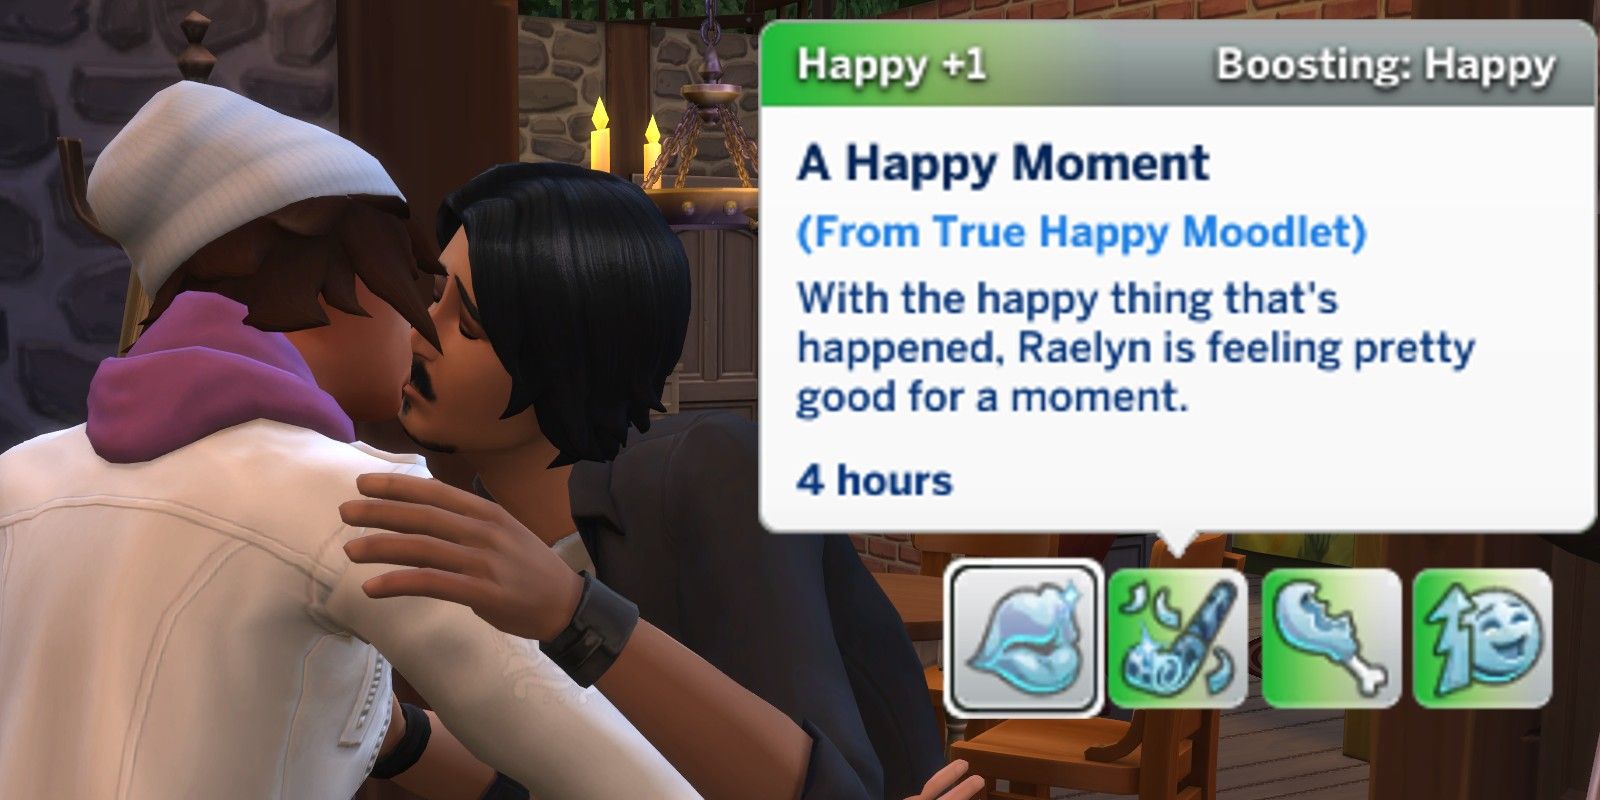 sims 4 important mods